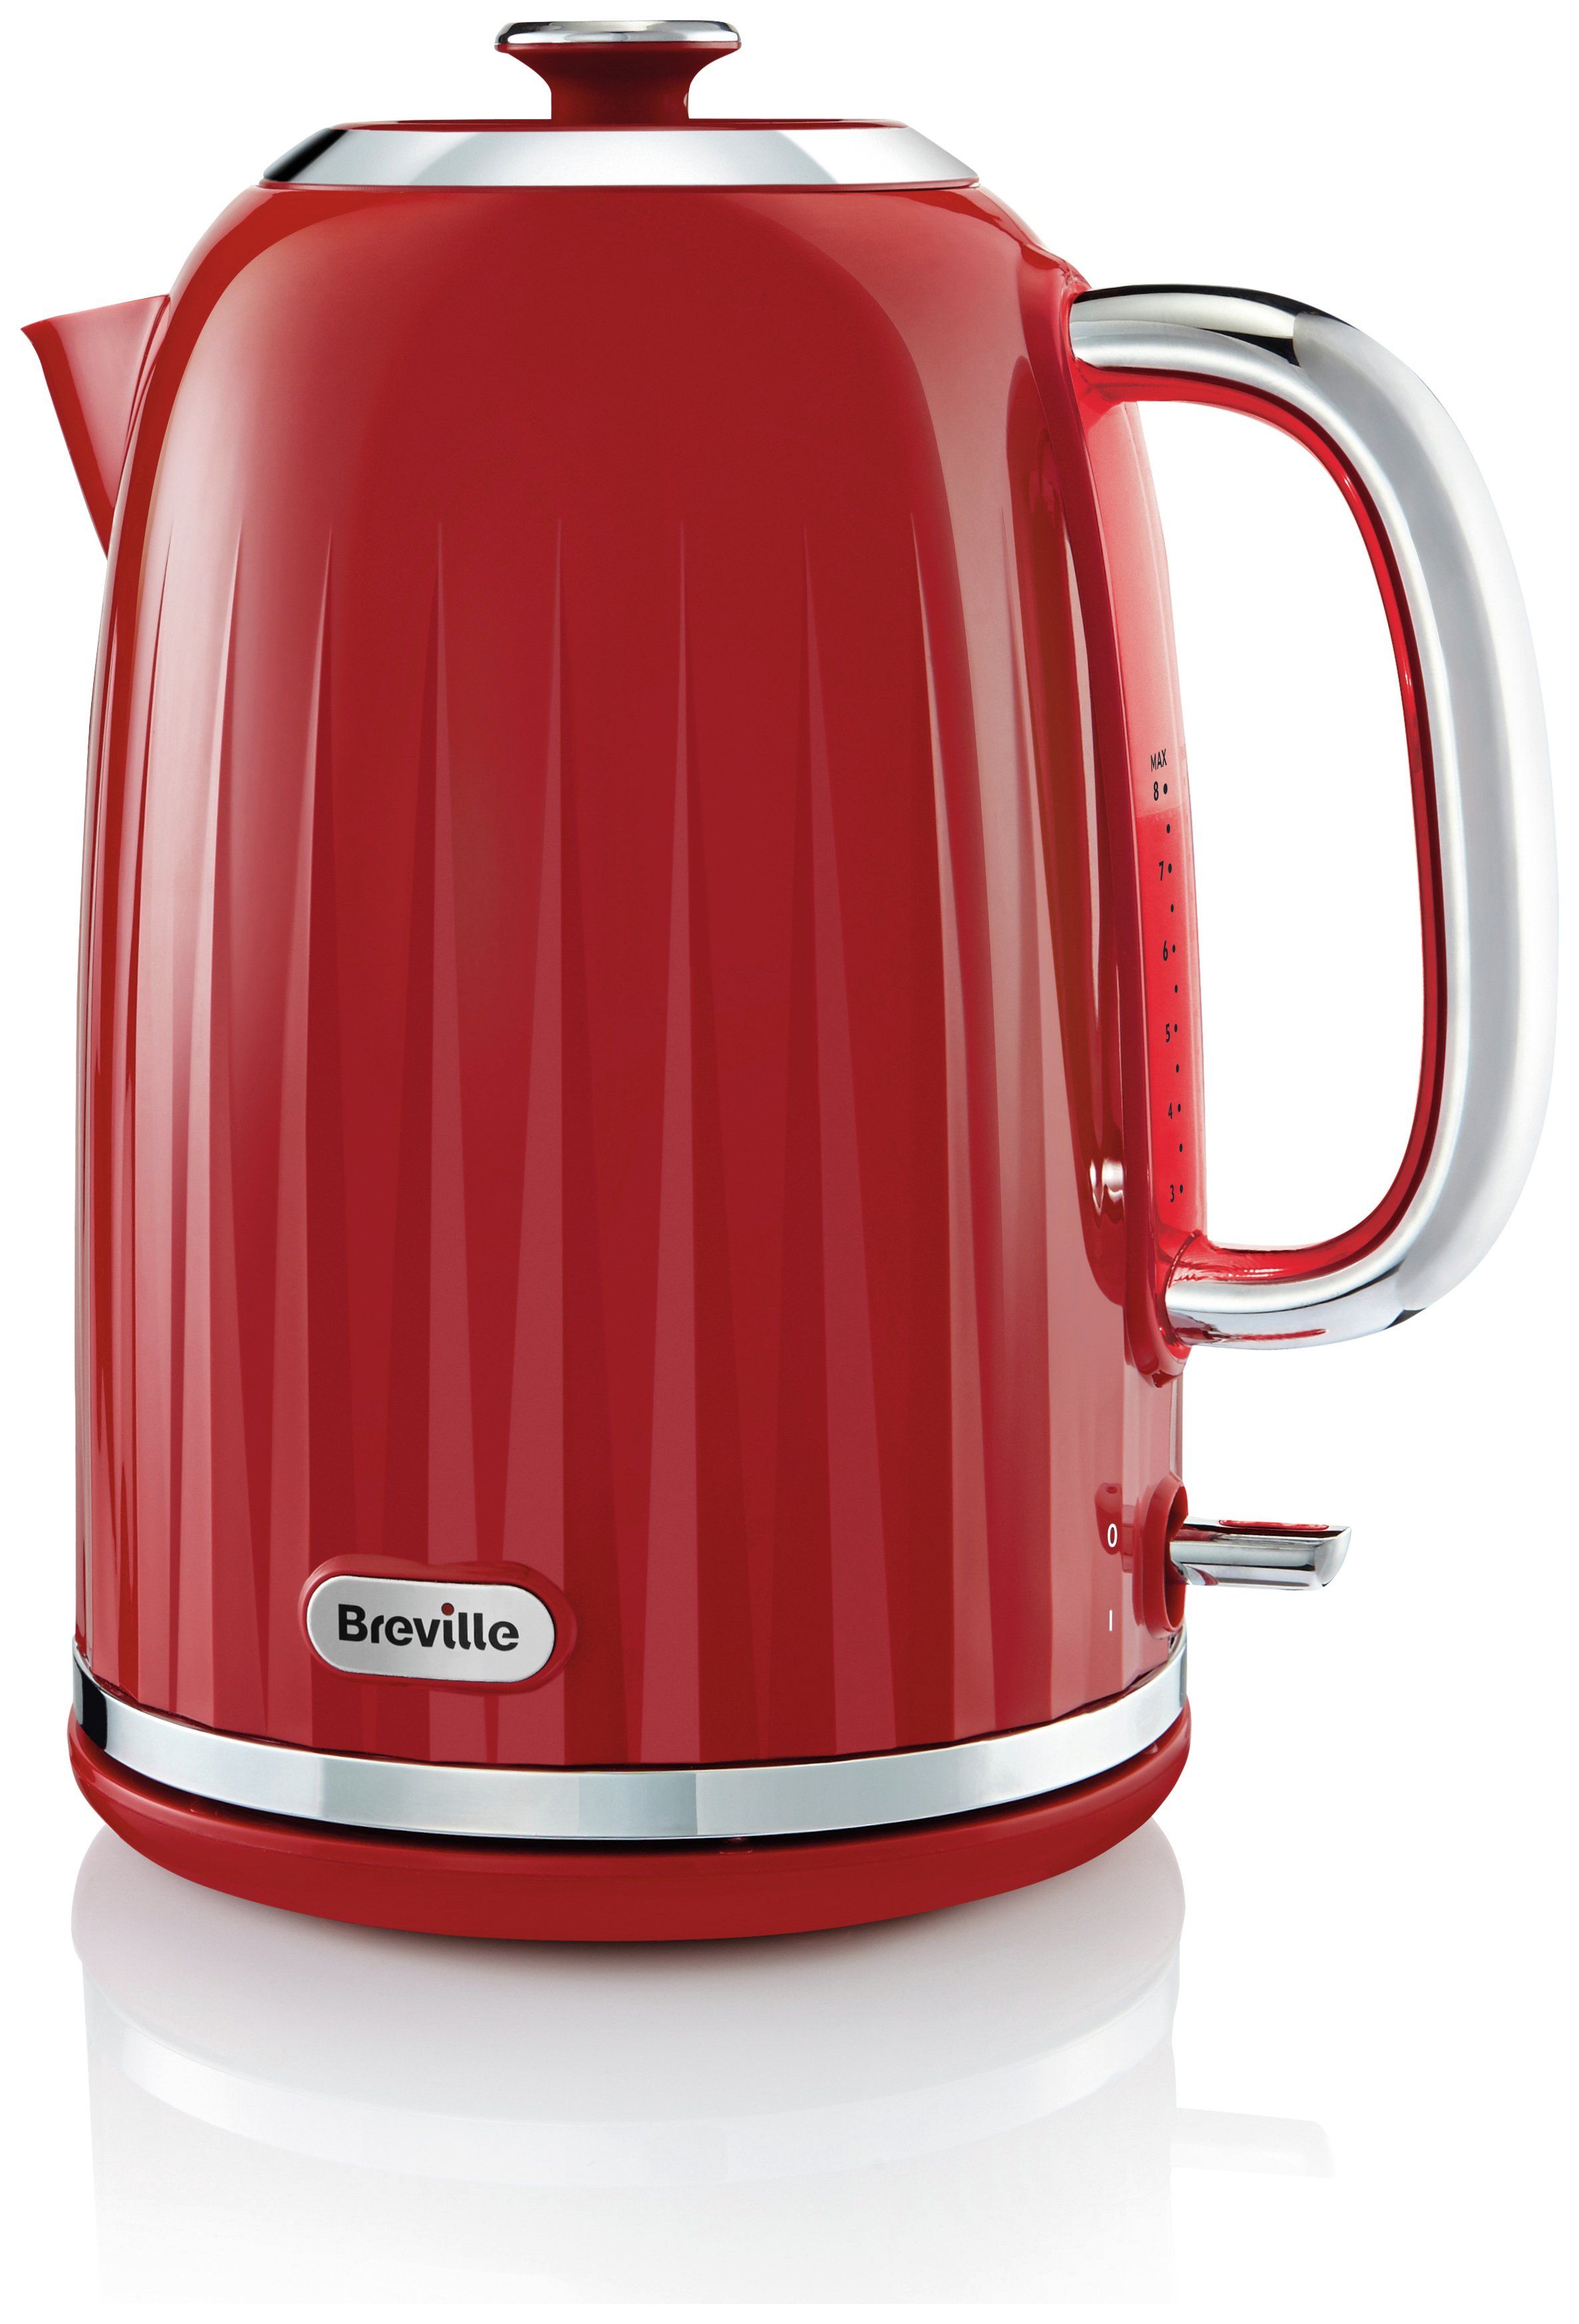 argos #uk Breville Impressions Jug Kettle - Red.: With a distinctive ...